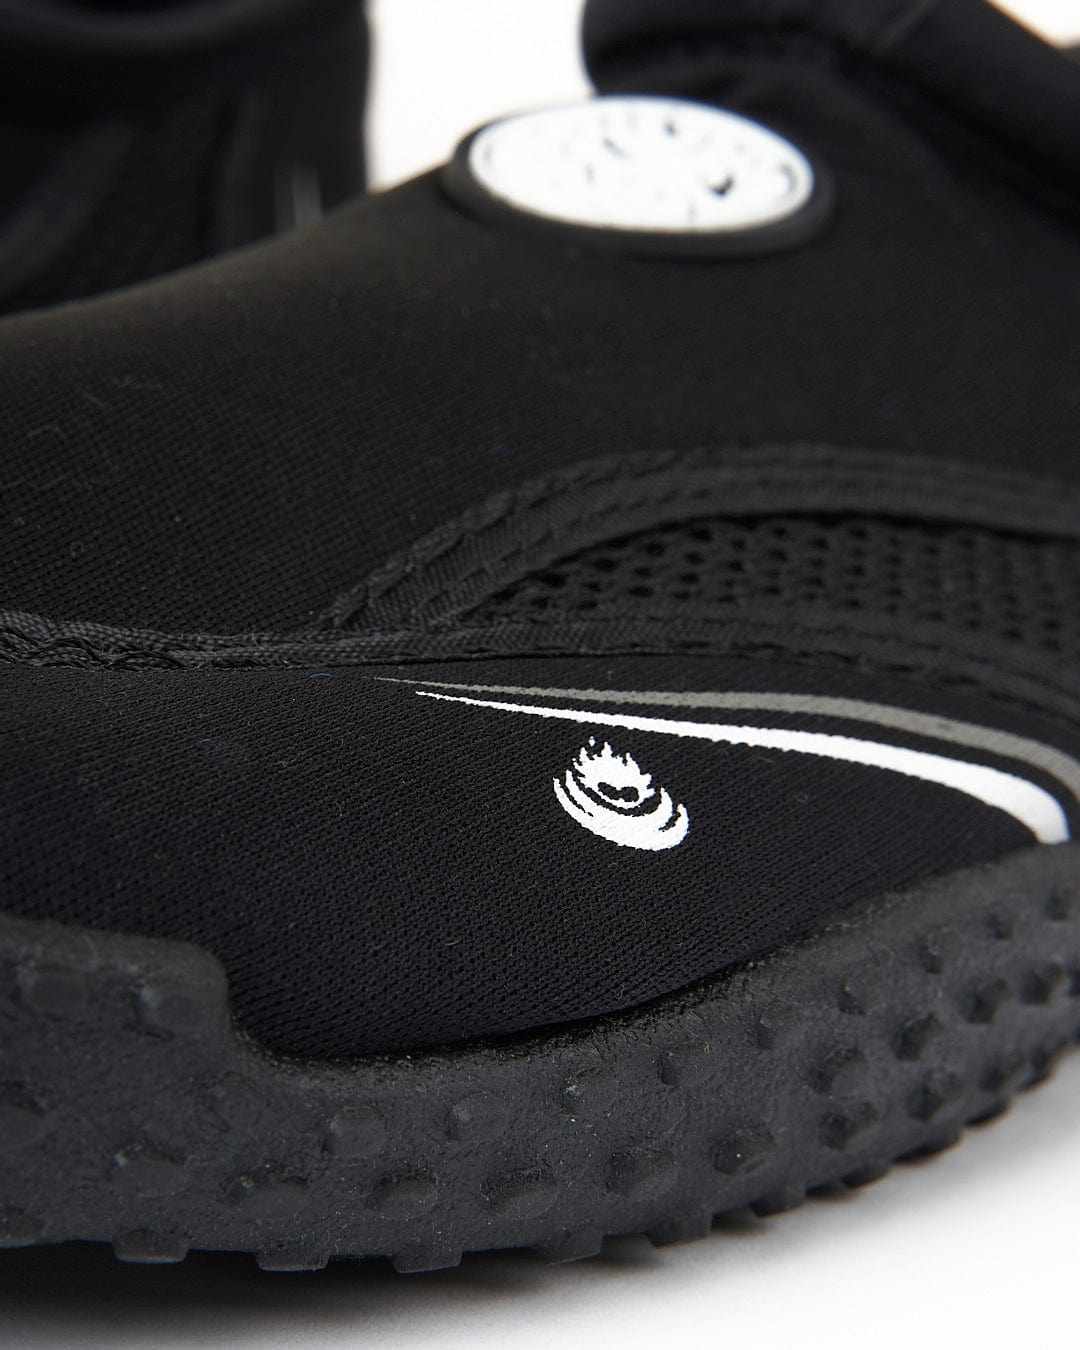 Close-up of a Saltrock Core Aqua Shoe - Black featuring a white logo on the side and a circular dial.